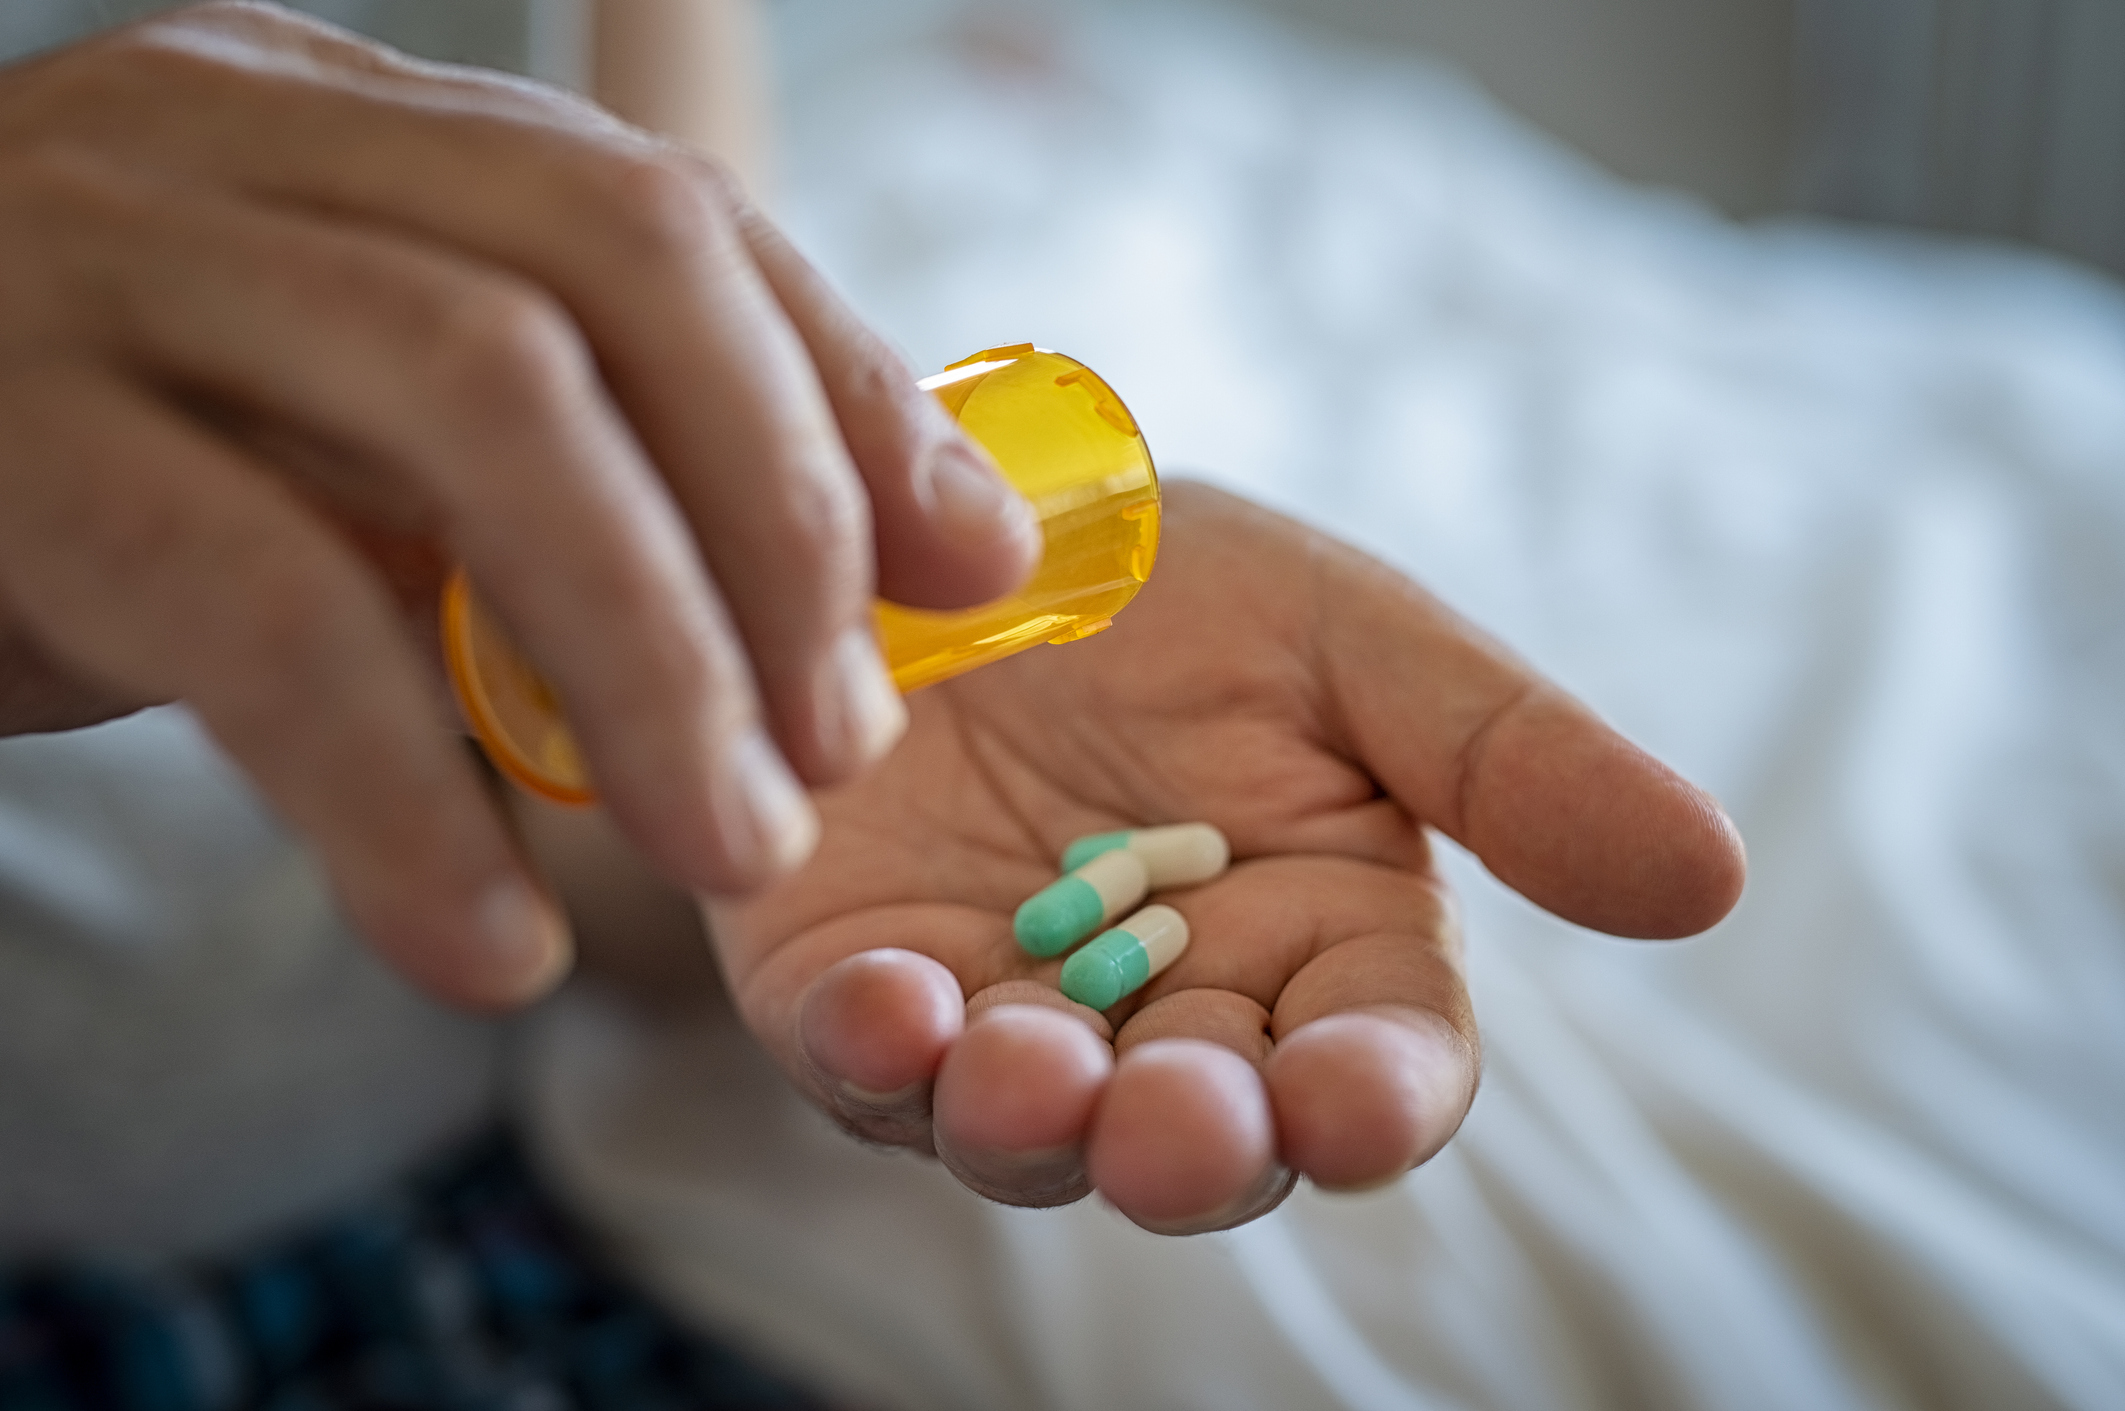 Closeup of man's hand pouring antidepressants from a pill bottle into hand.